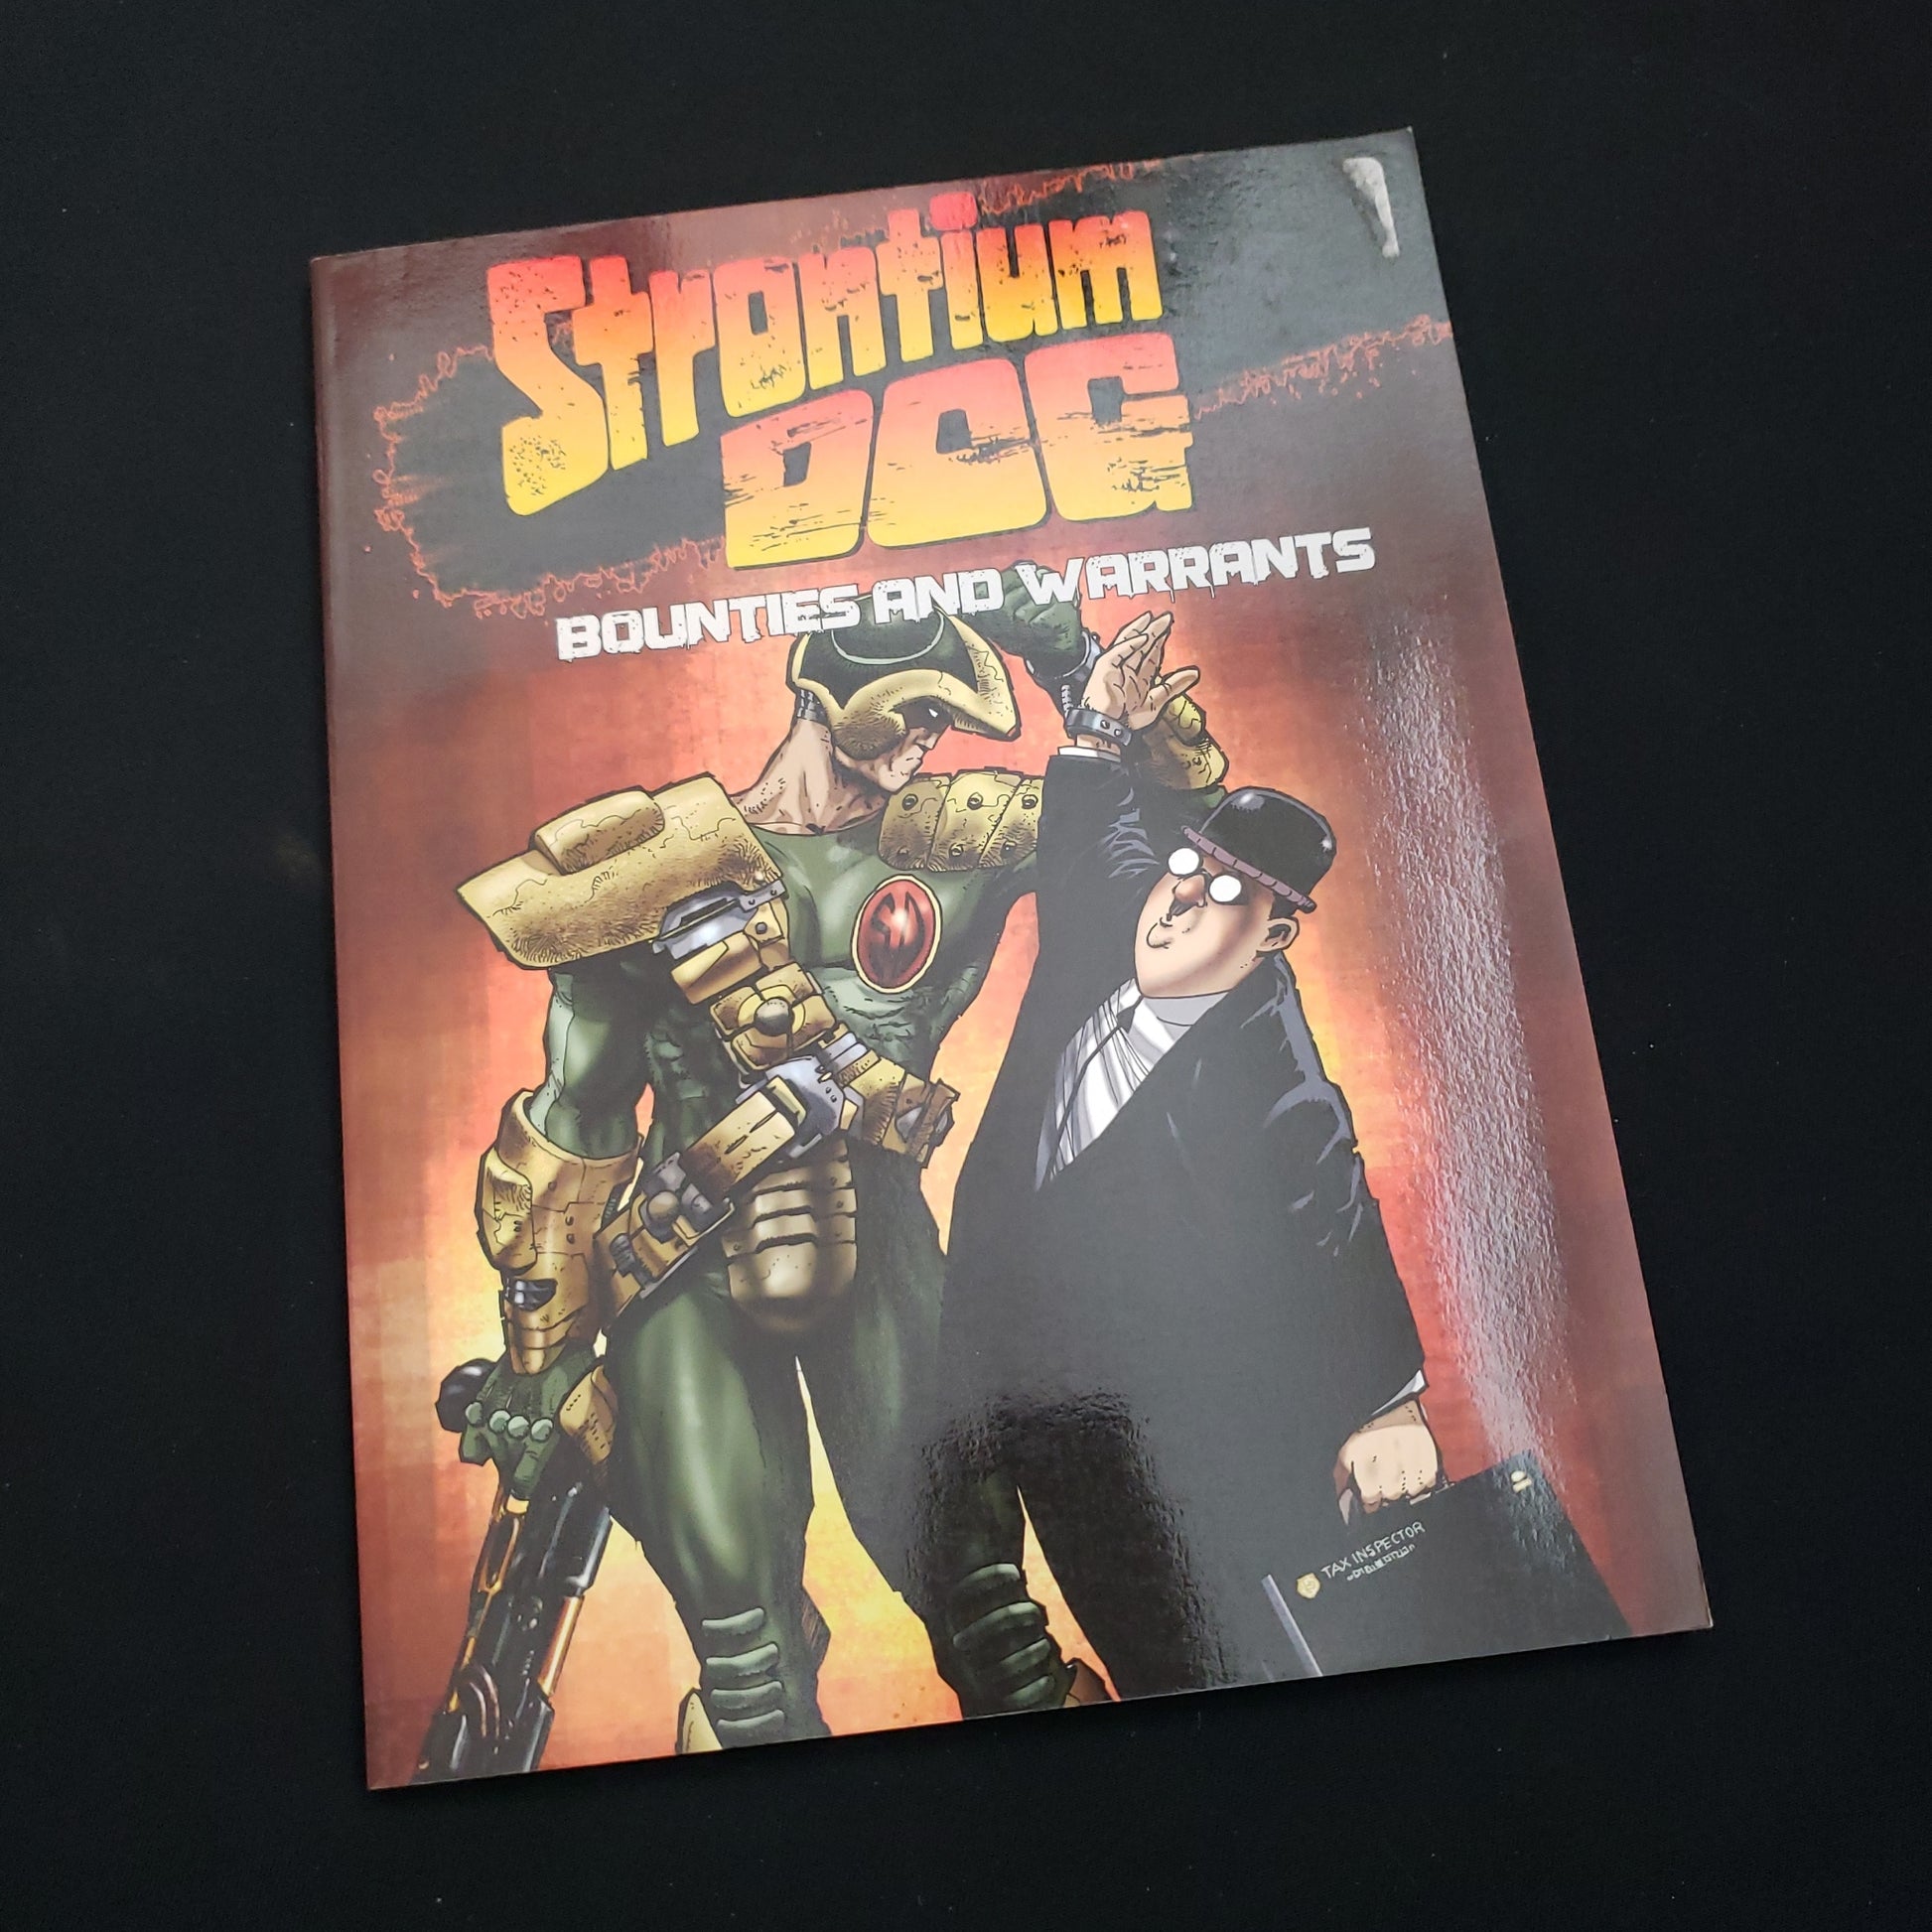 Image shows the front cover of the Bounties and Warrants book for the roleplaying game Strontium Dog